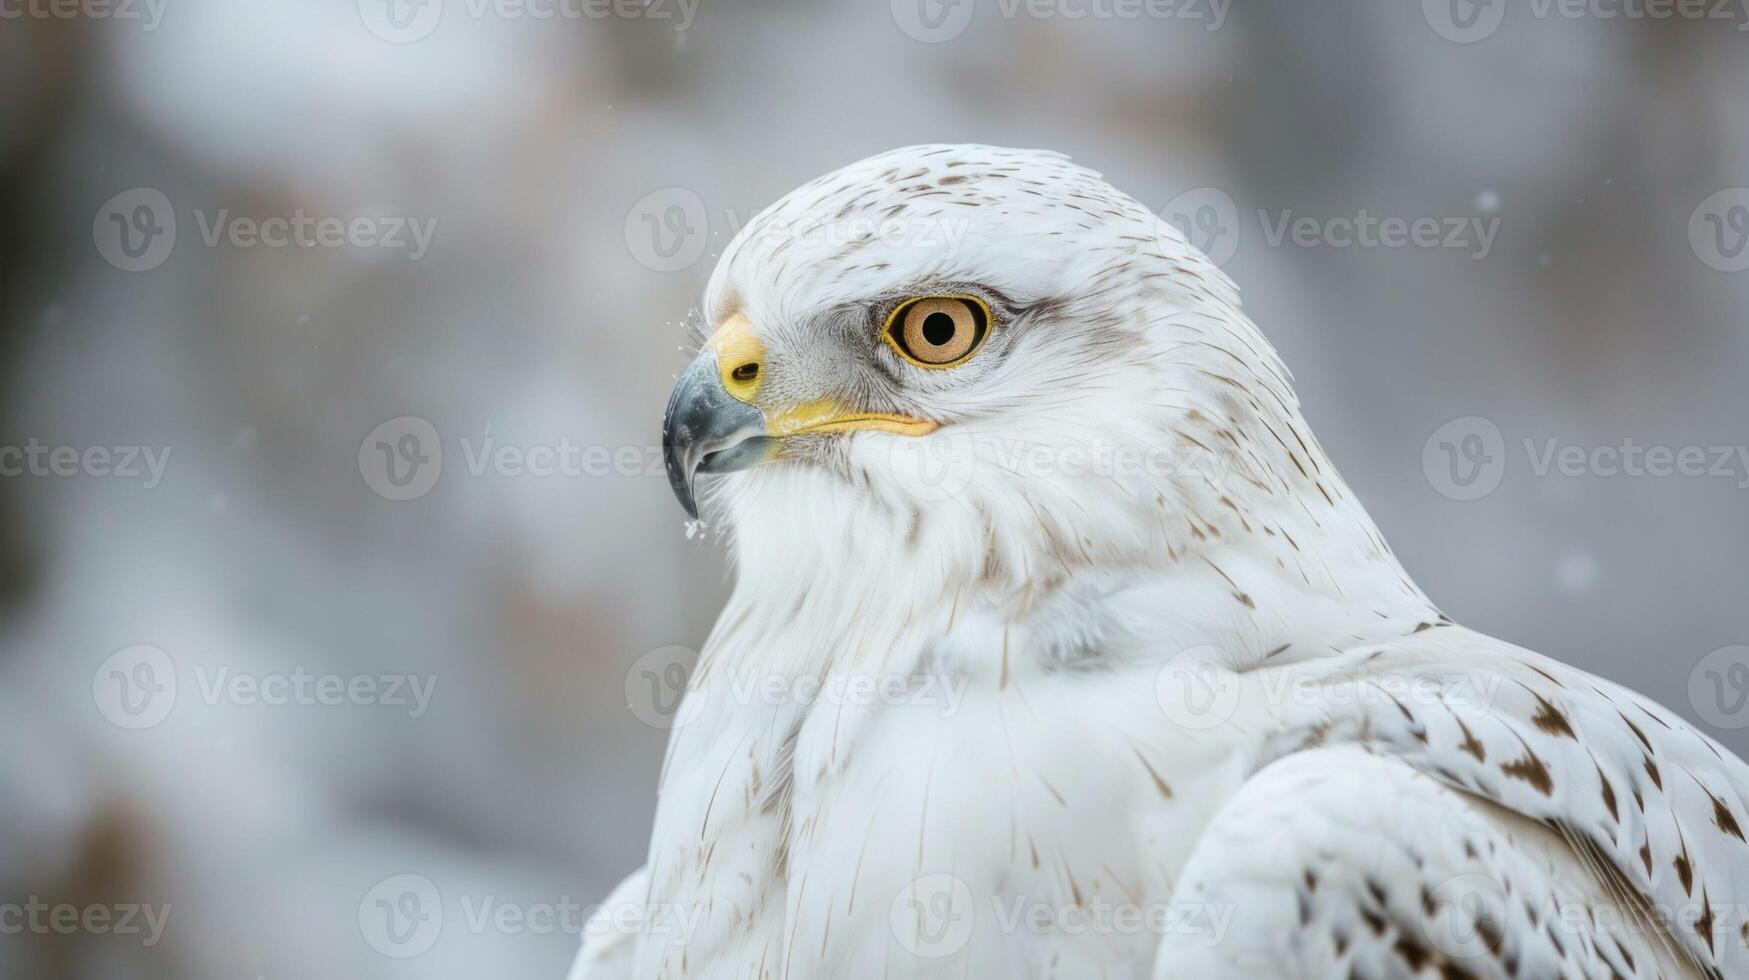 Close-up portrait of a majestic eagle with sharp eyes and detailed feathers in natural snowy environment photo